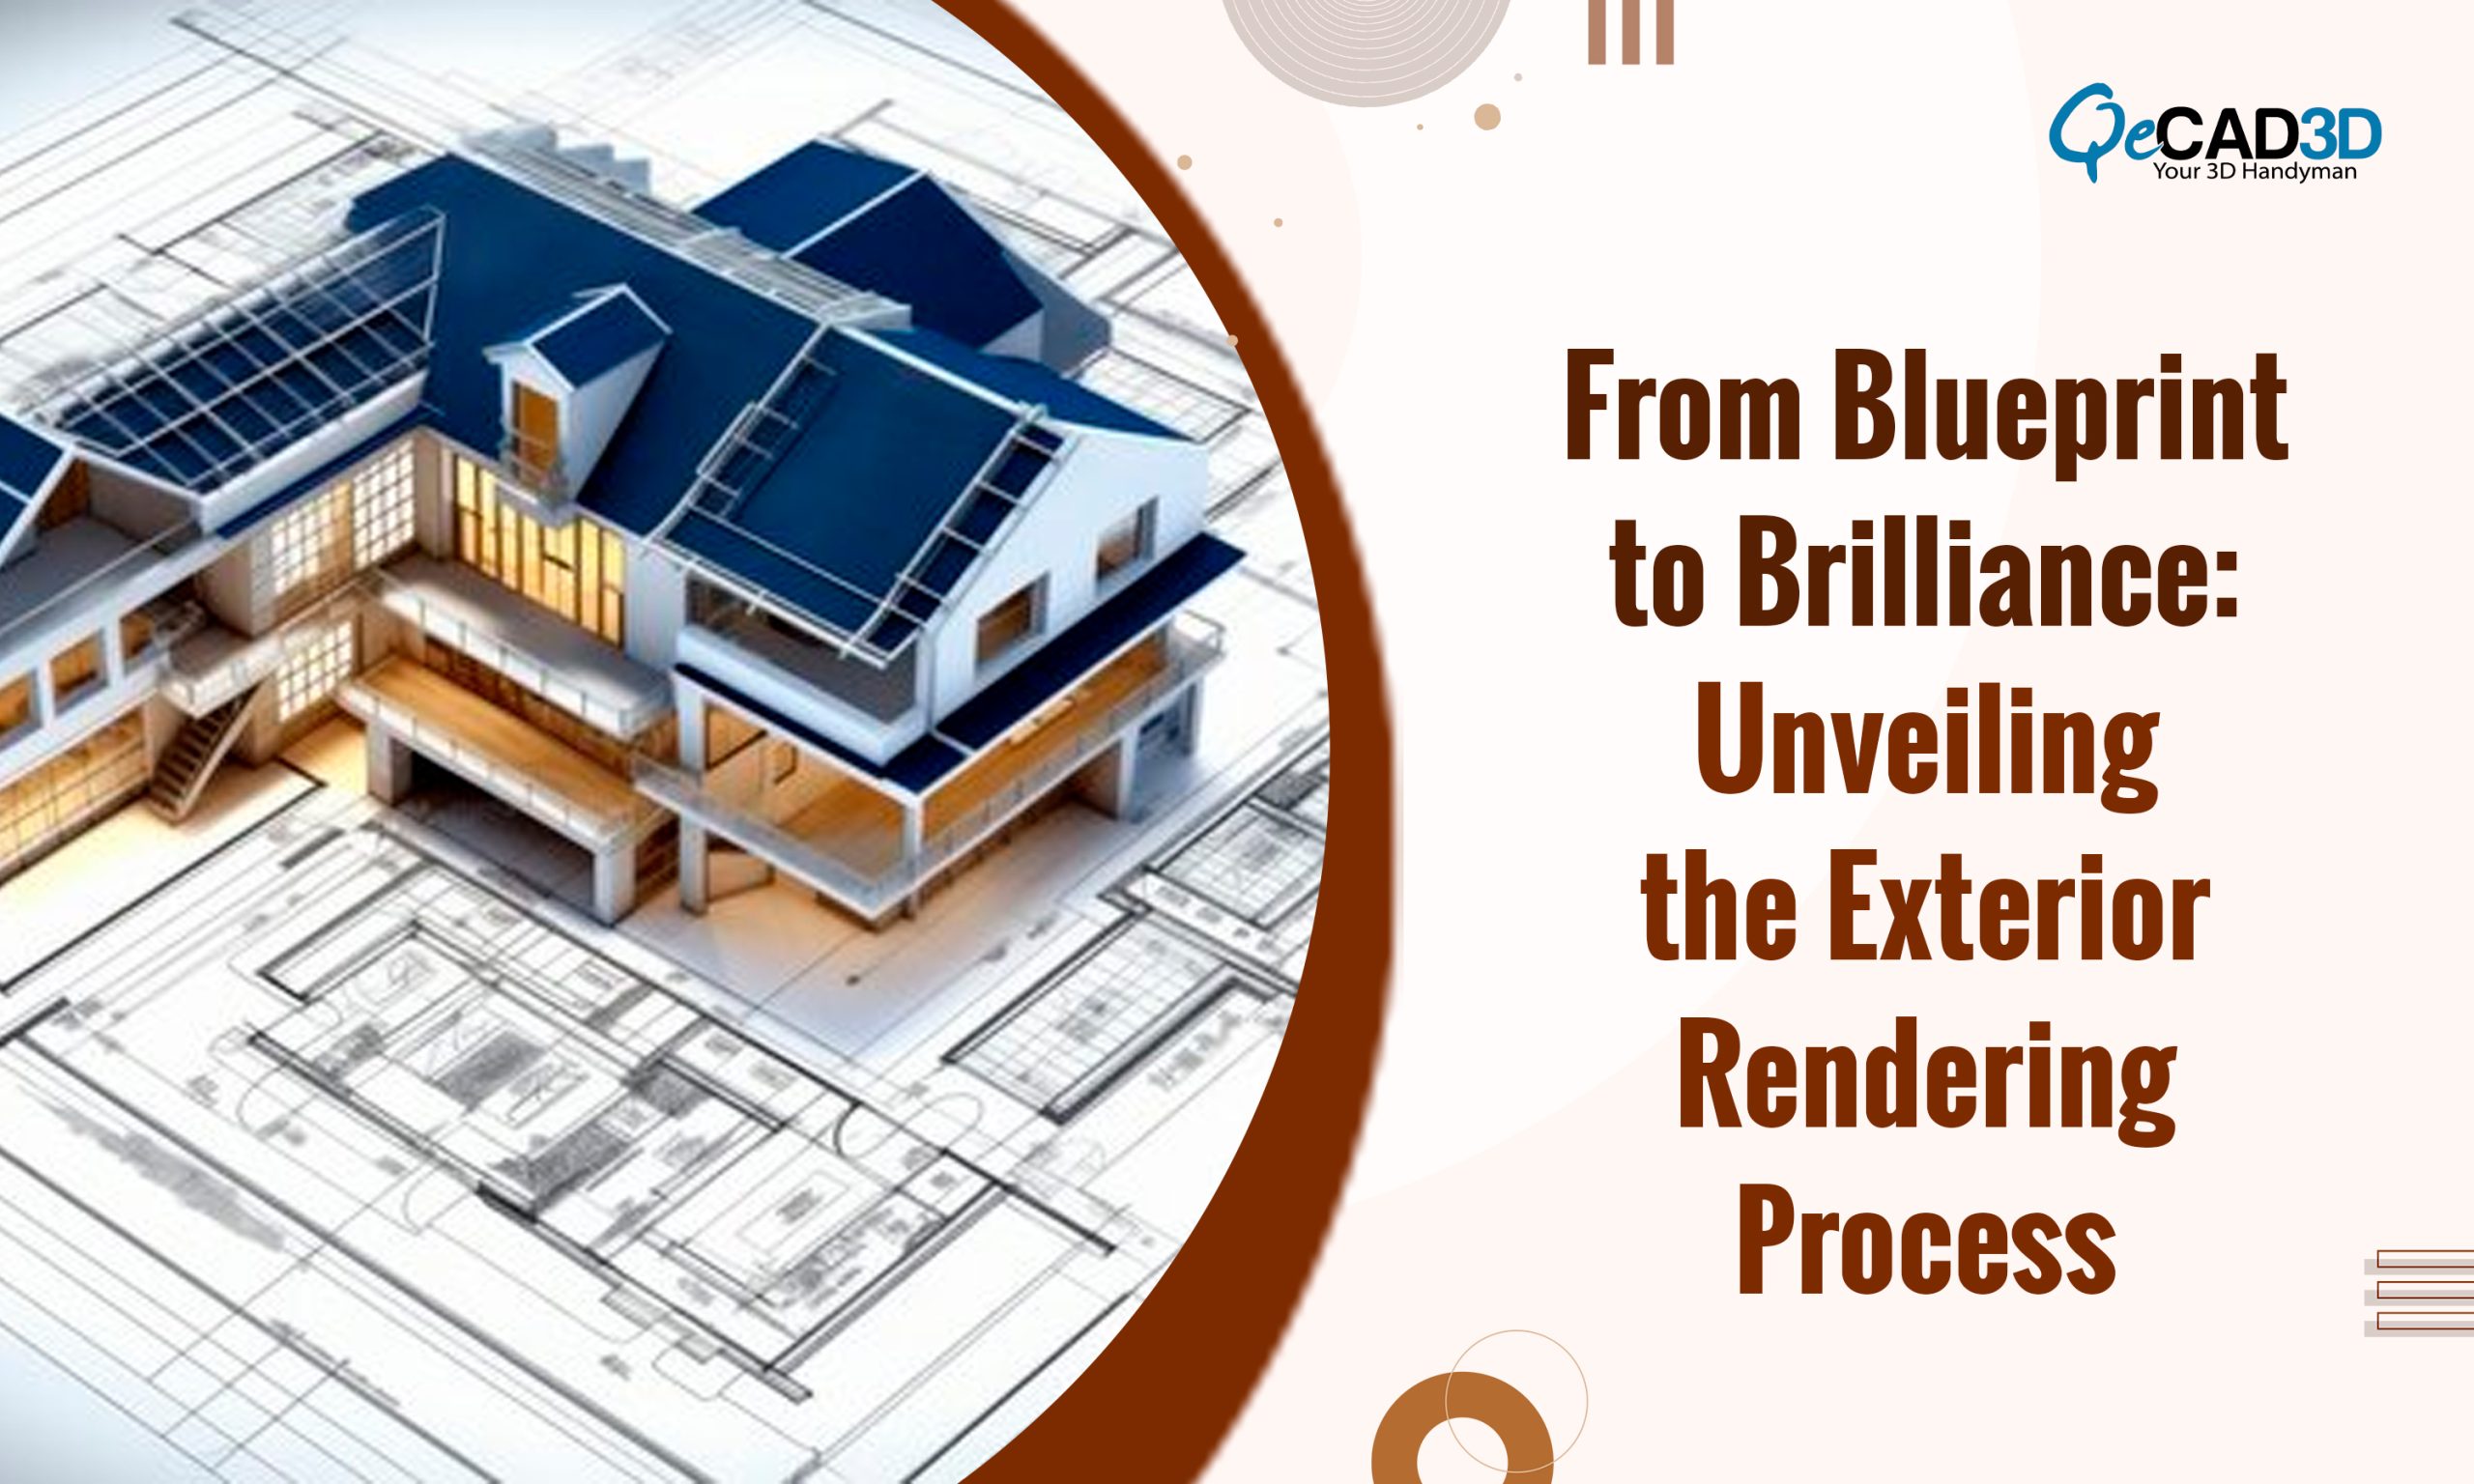 From Blueprint to Brilliance: Unveiling the Exterior Rendering Process